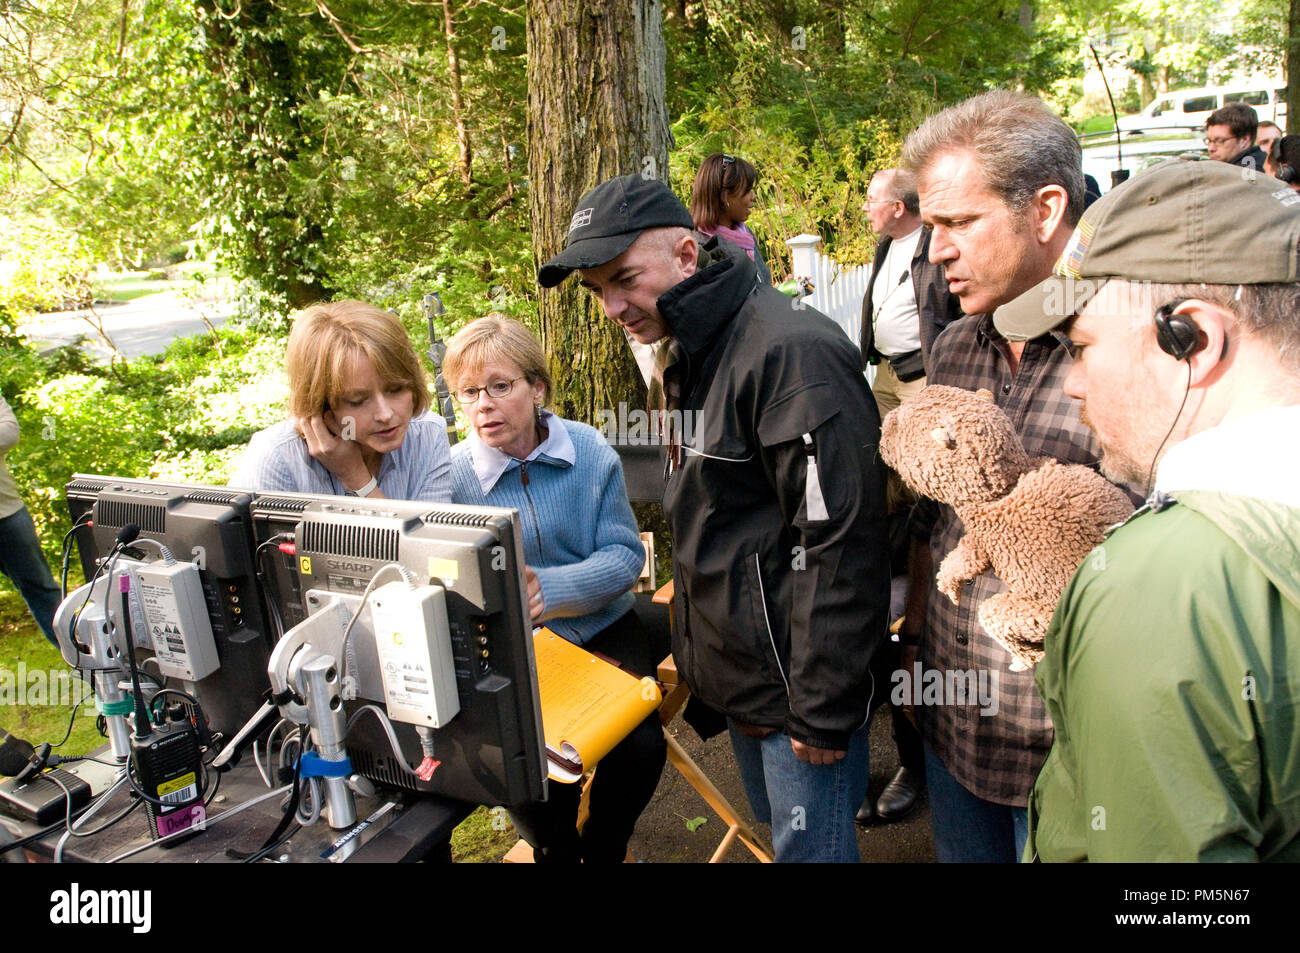 Director JODIE FOSTER on the set of THE BEAVER with star MEL GIBSON. Stock Photo